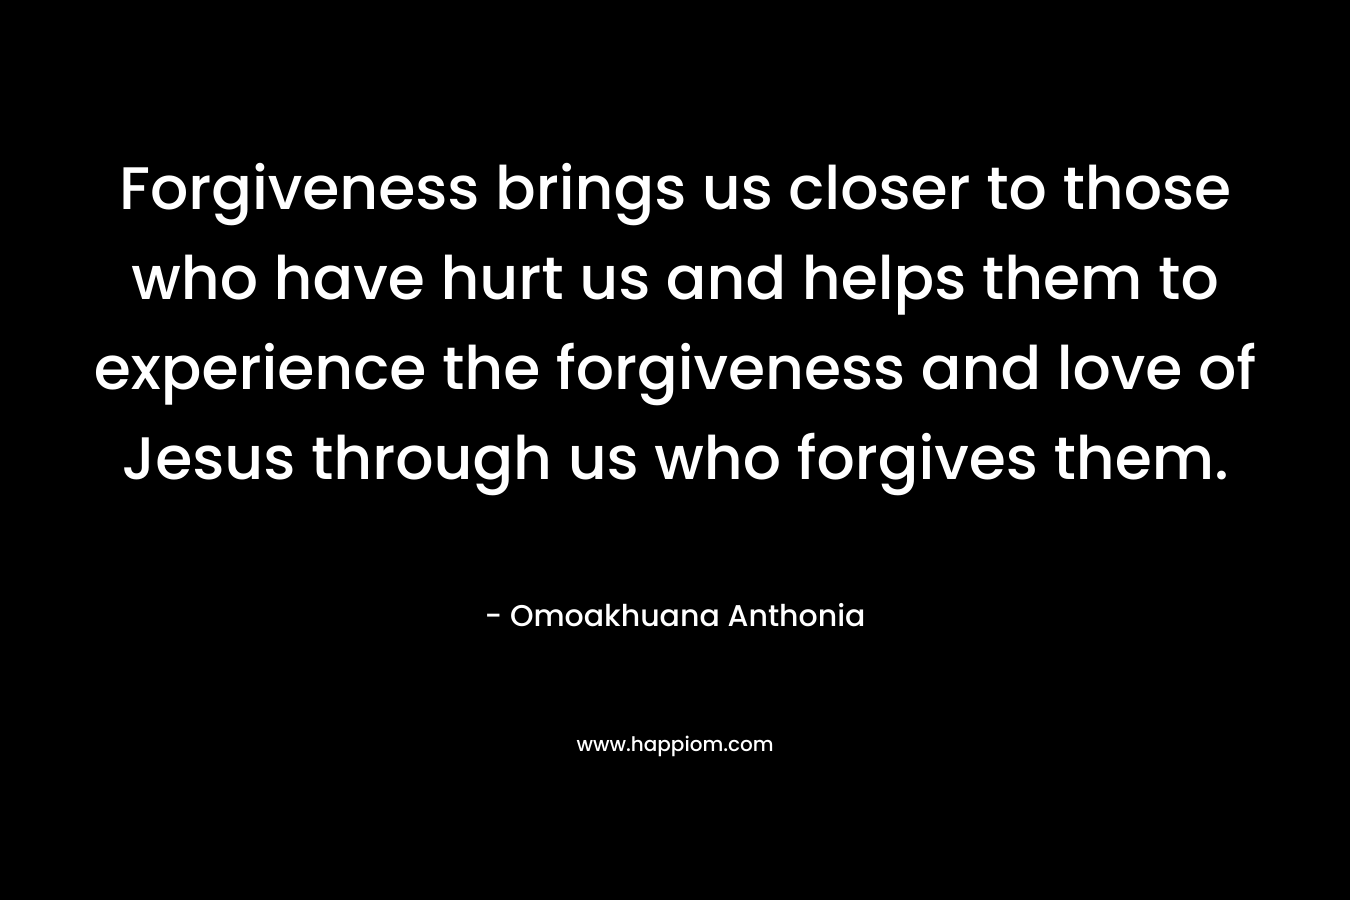 Forgiveness brings us closer to those who have hurt us and helps them to experience the forgiveness and love of Jesus through us who forgives them. – Omoakhuana Anthonia